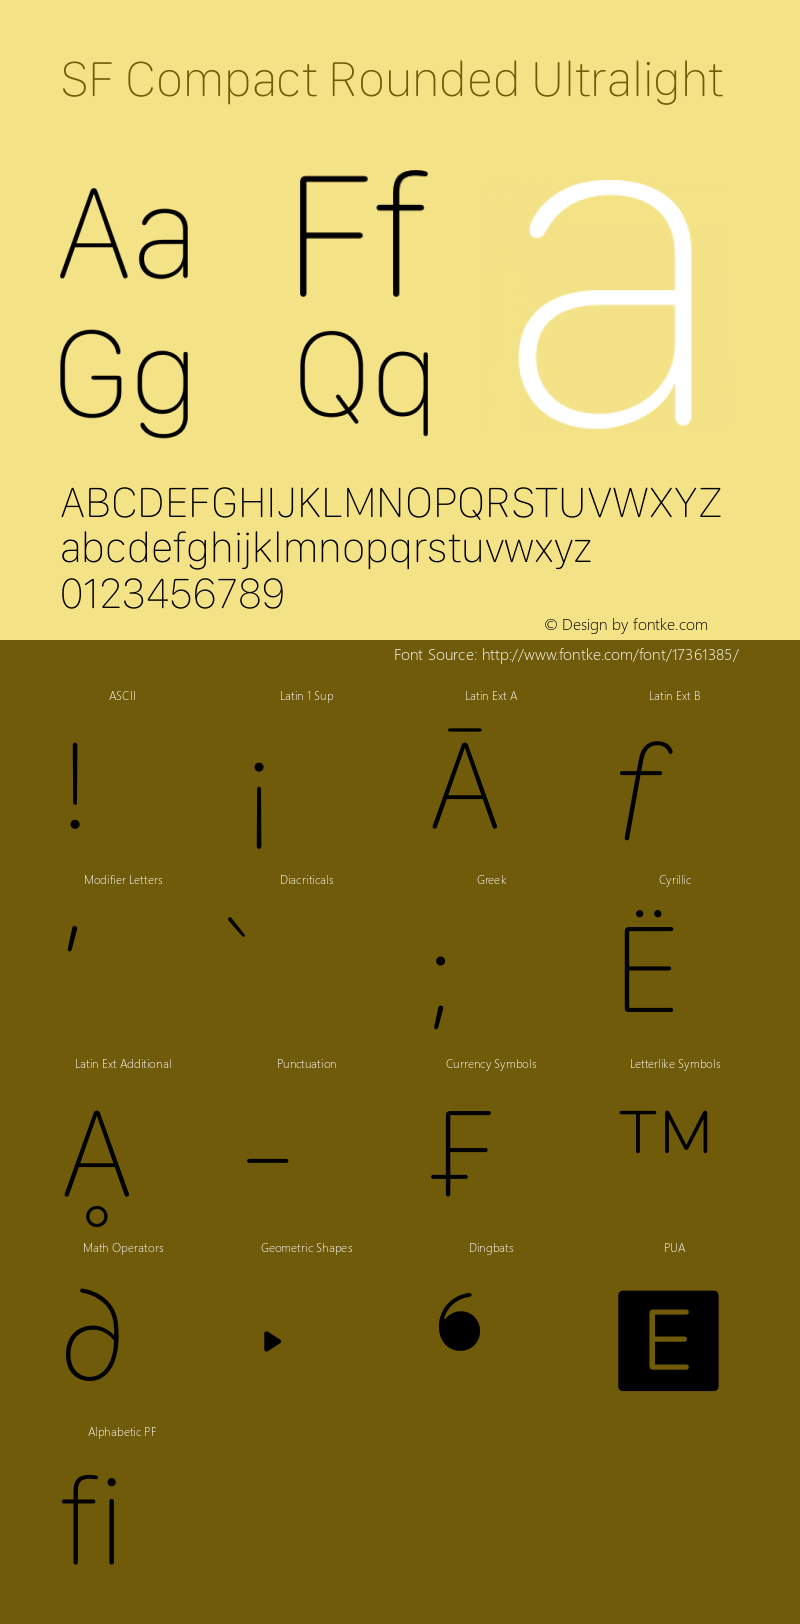 SF Compact Rounded Ultralight 12.0d5e4 Font Sample